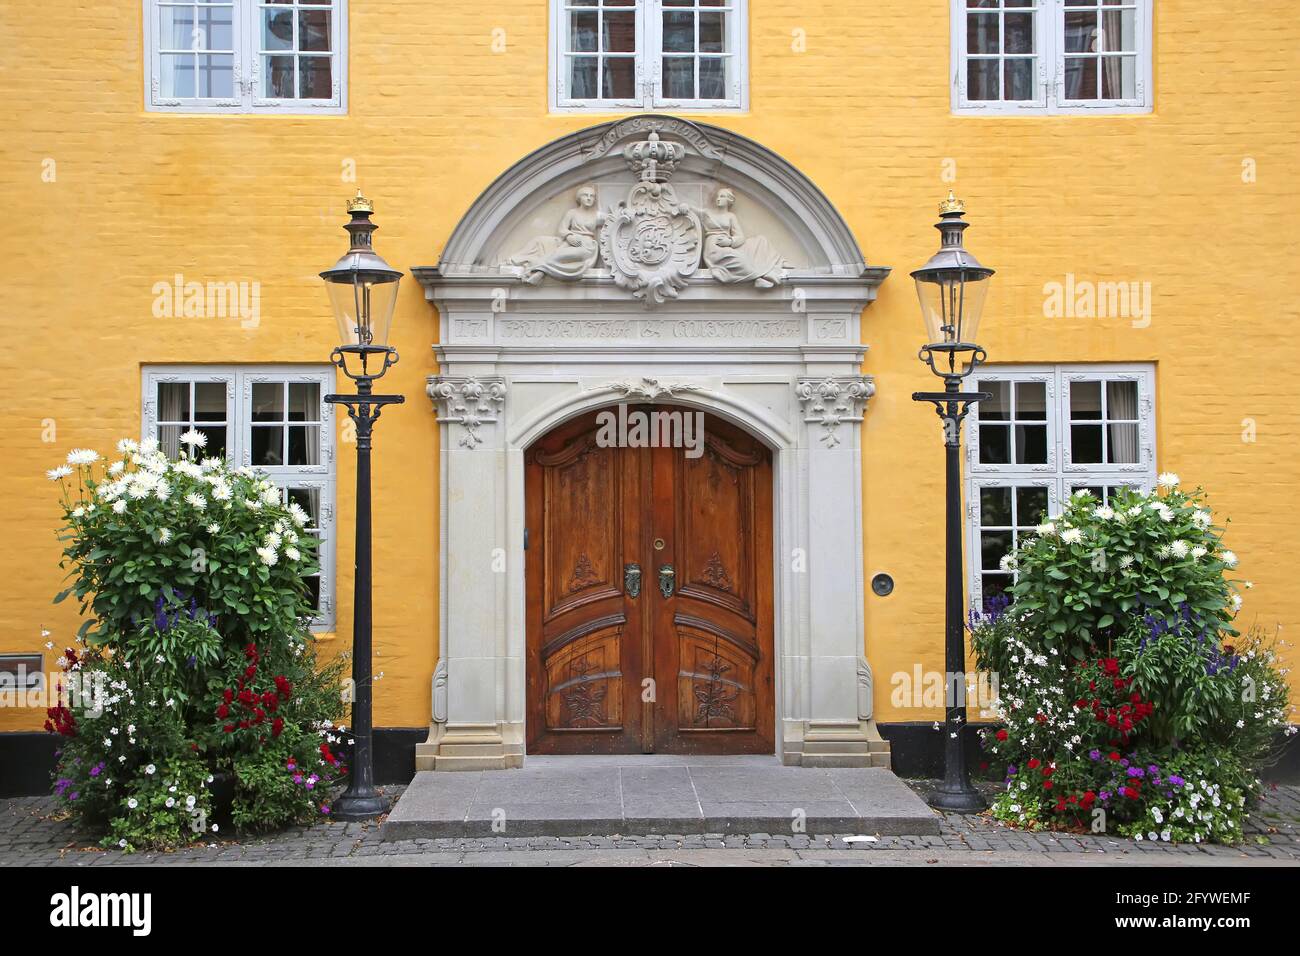 Entrance doorway of the Old City Hall. Beautiful historic yellow painted building with a wooden door in the city center, Aalborg, Denmark. Stock Photo